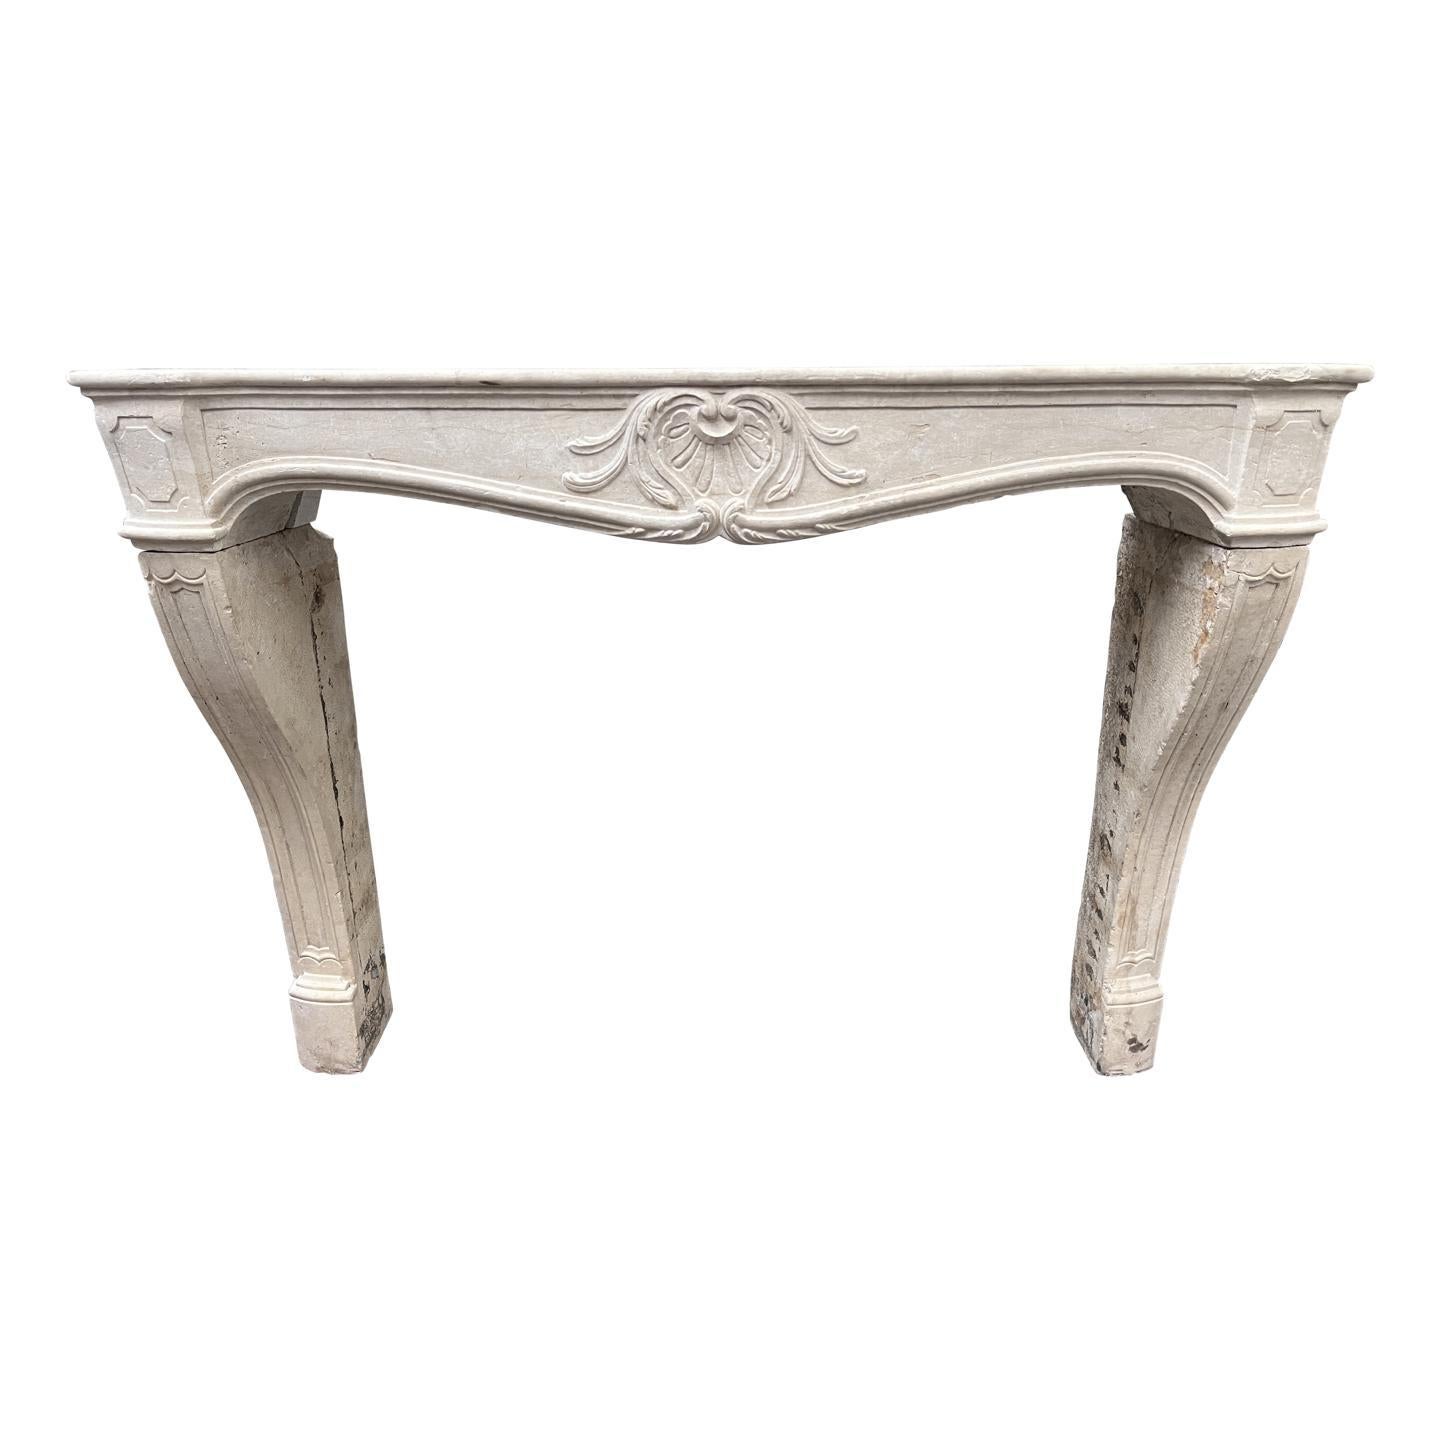 Louis XVI Fireplace Mantel from around the Year 1800 For Sale